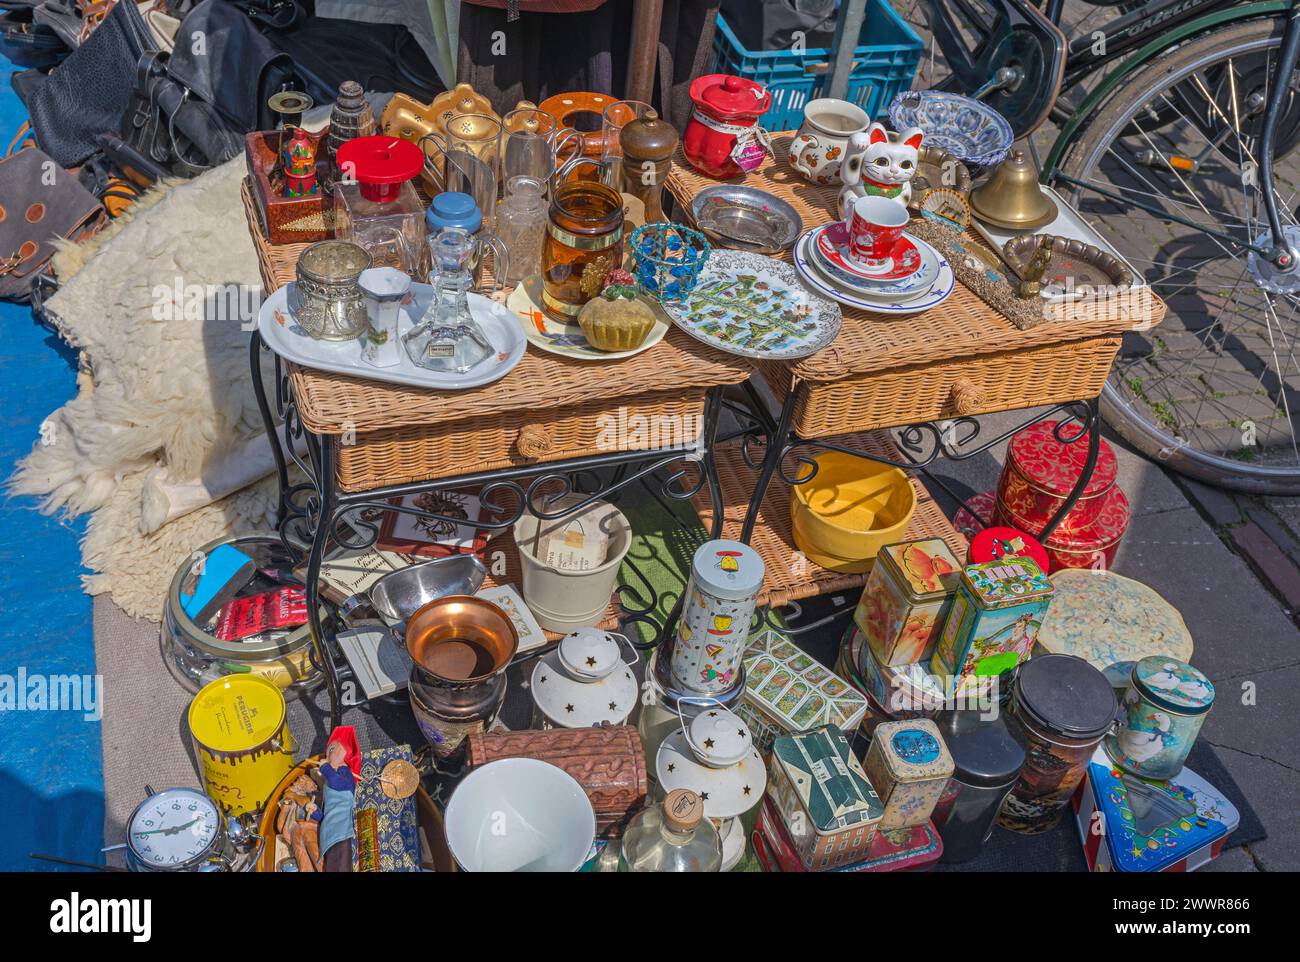 Amsterdam, Netherlands - May 16, 2018: Crockery Knick Knack Vintage Boxes for Sale at Flea Market in Old Town. Stock Photo